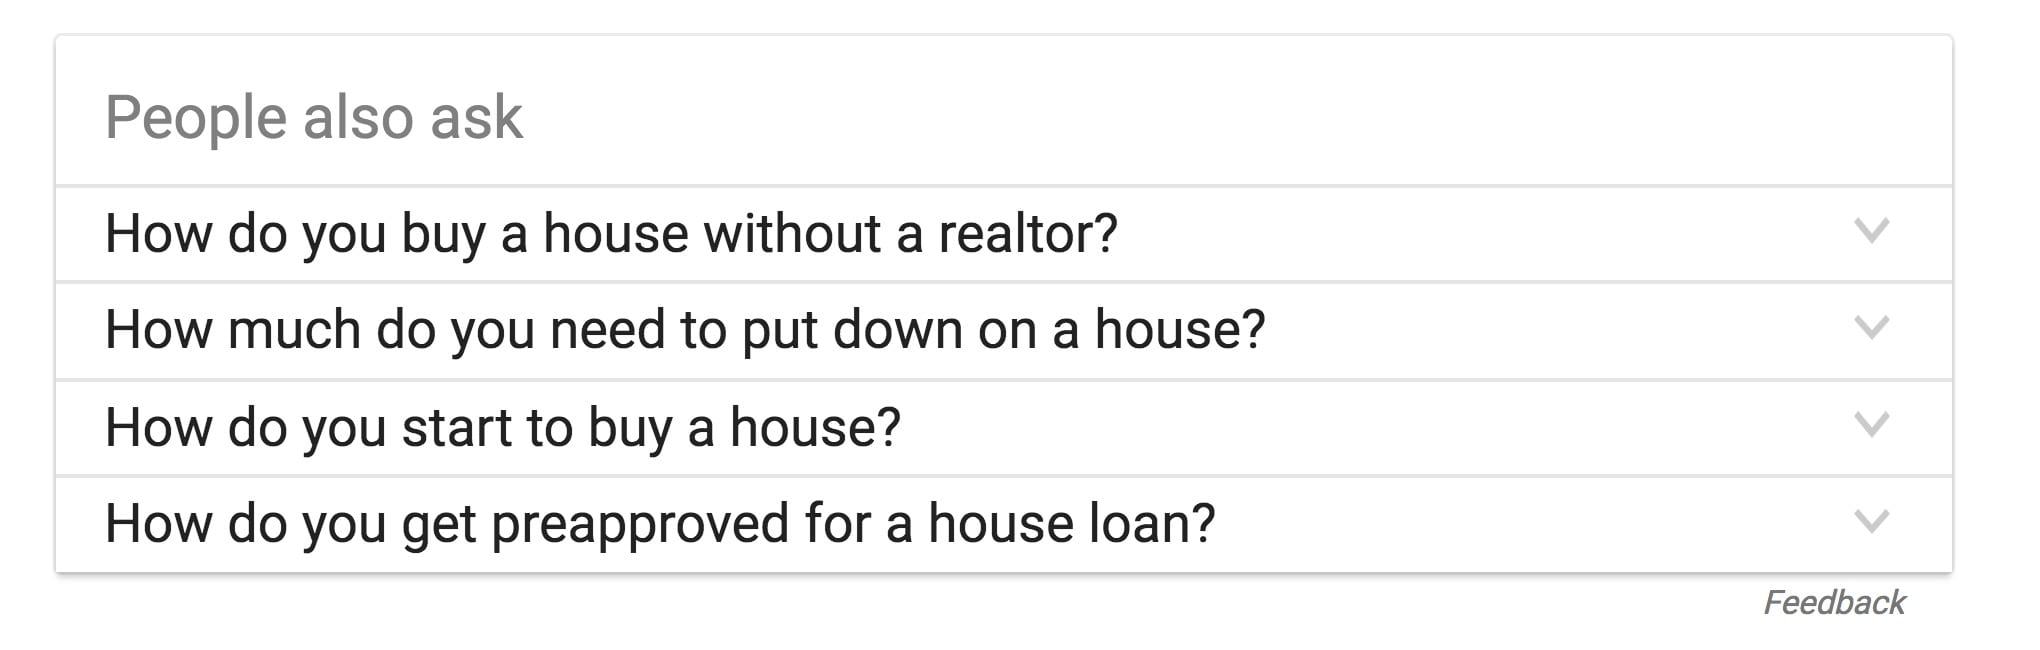 People Also Ask Box on Google offers up other suggestions based on what people have really asked